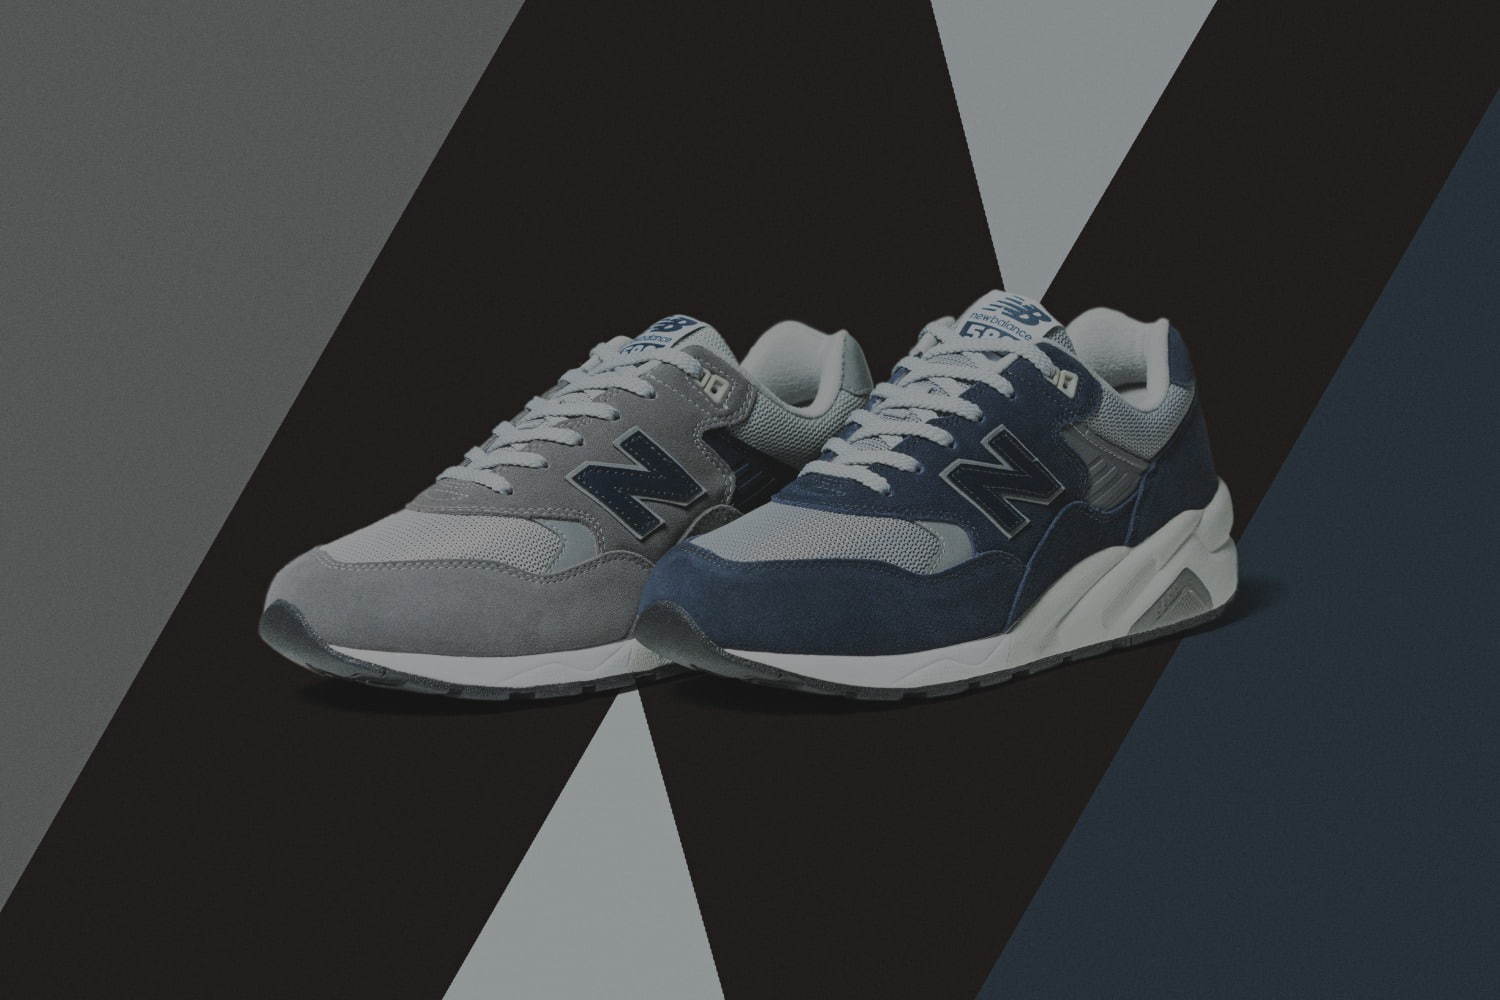 CMT580 "LIMITED EDITION for New Balance/BEAMS/mita sneakers"グレー、ネイビー 各14,900円＋税